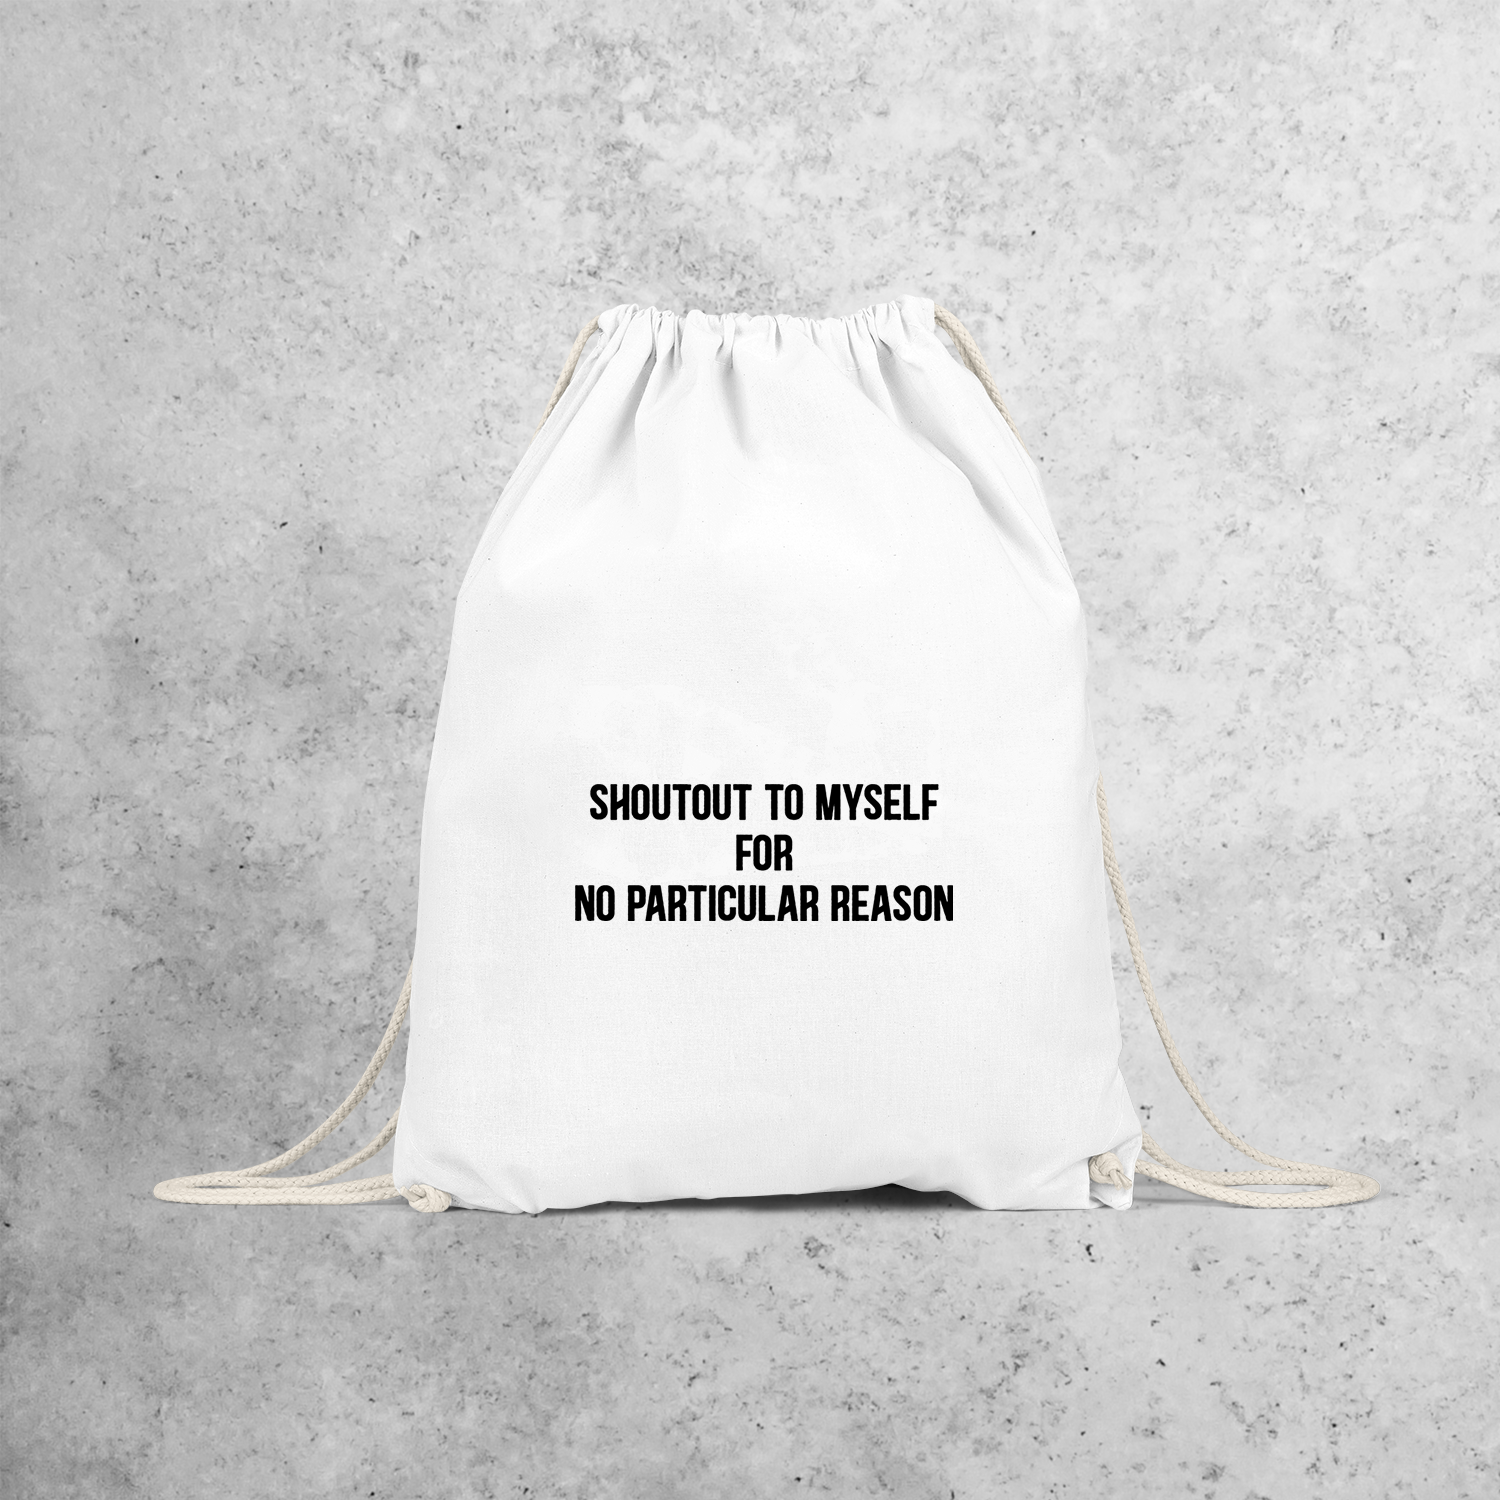 'Shoutout to myself for no particular reason' backpack